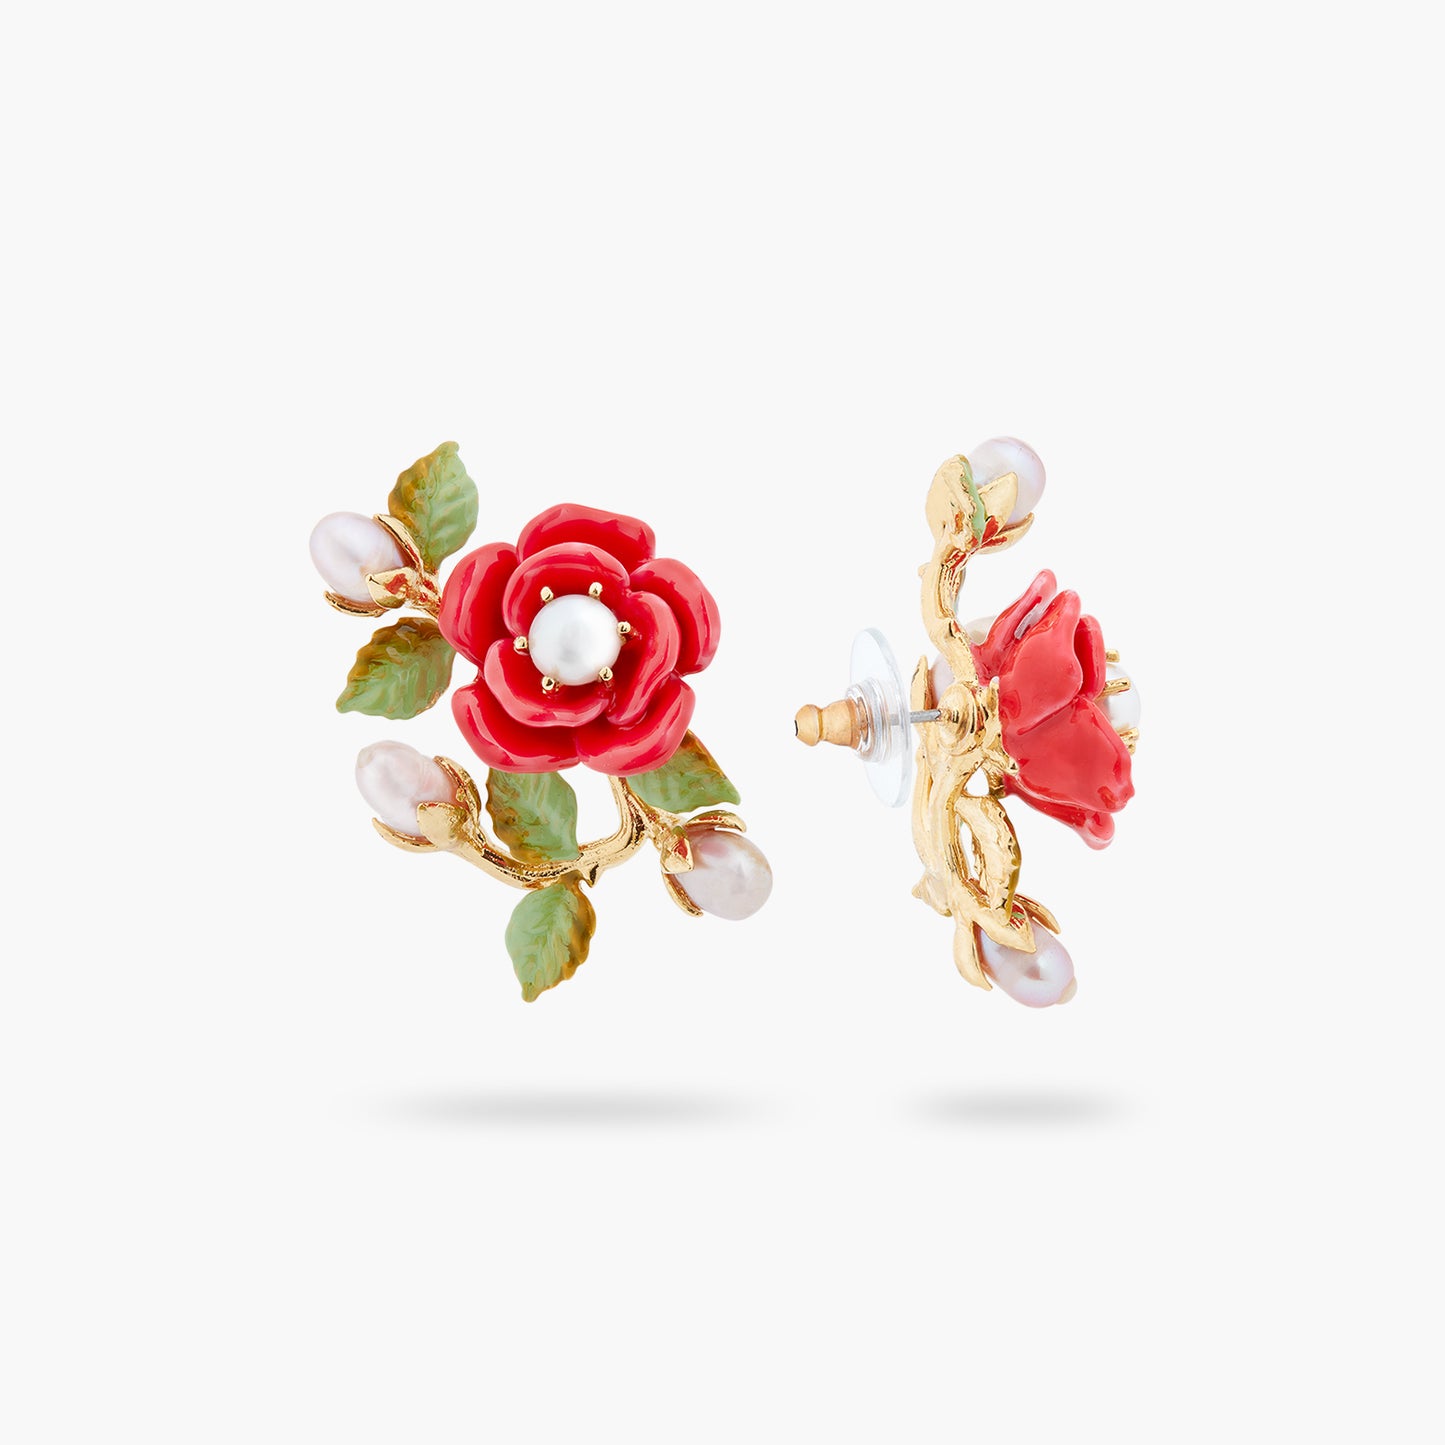 Rose branch and cultured pearl earrings | ASAR1081